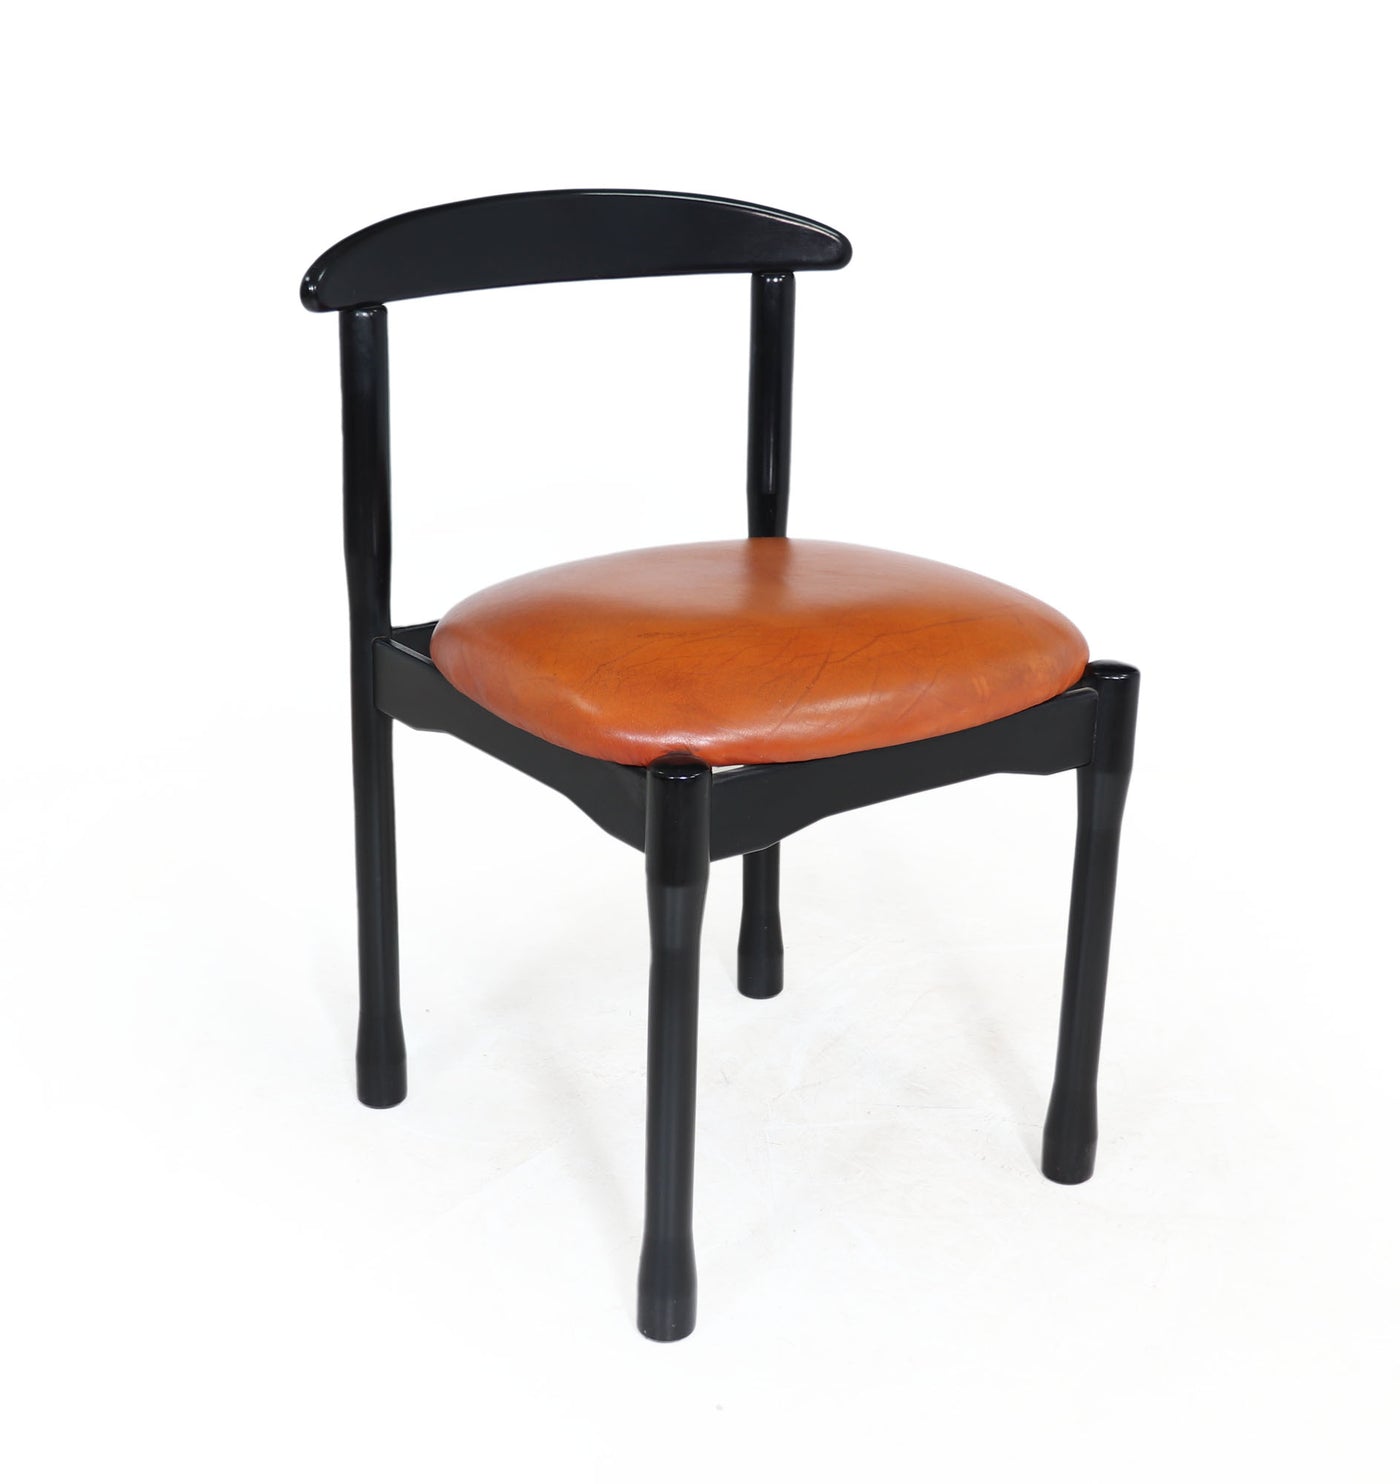 MId Century Italian Dining Chairs by Vico Magistretti single